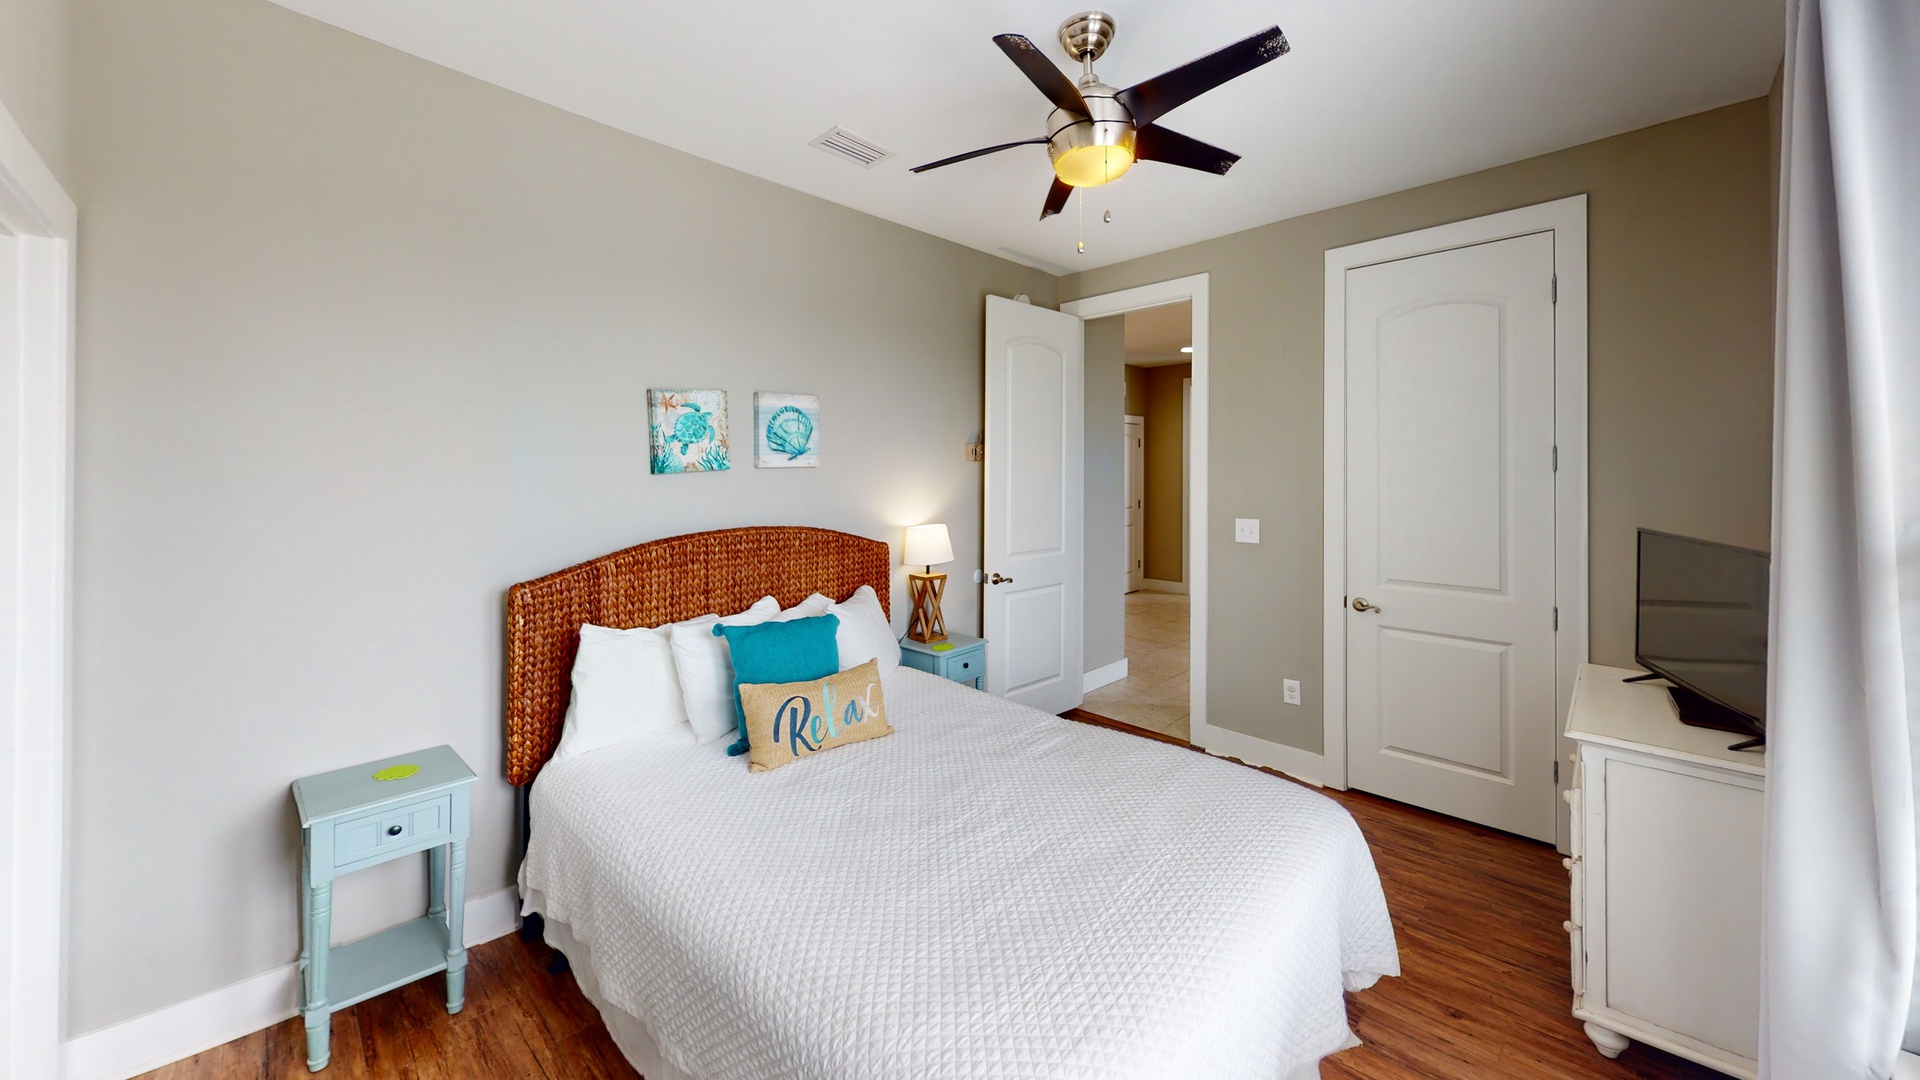 Bedroom 3 comes with a Queen bed and ceiling fan